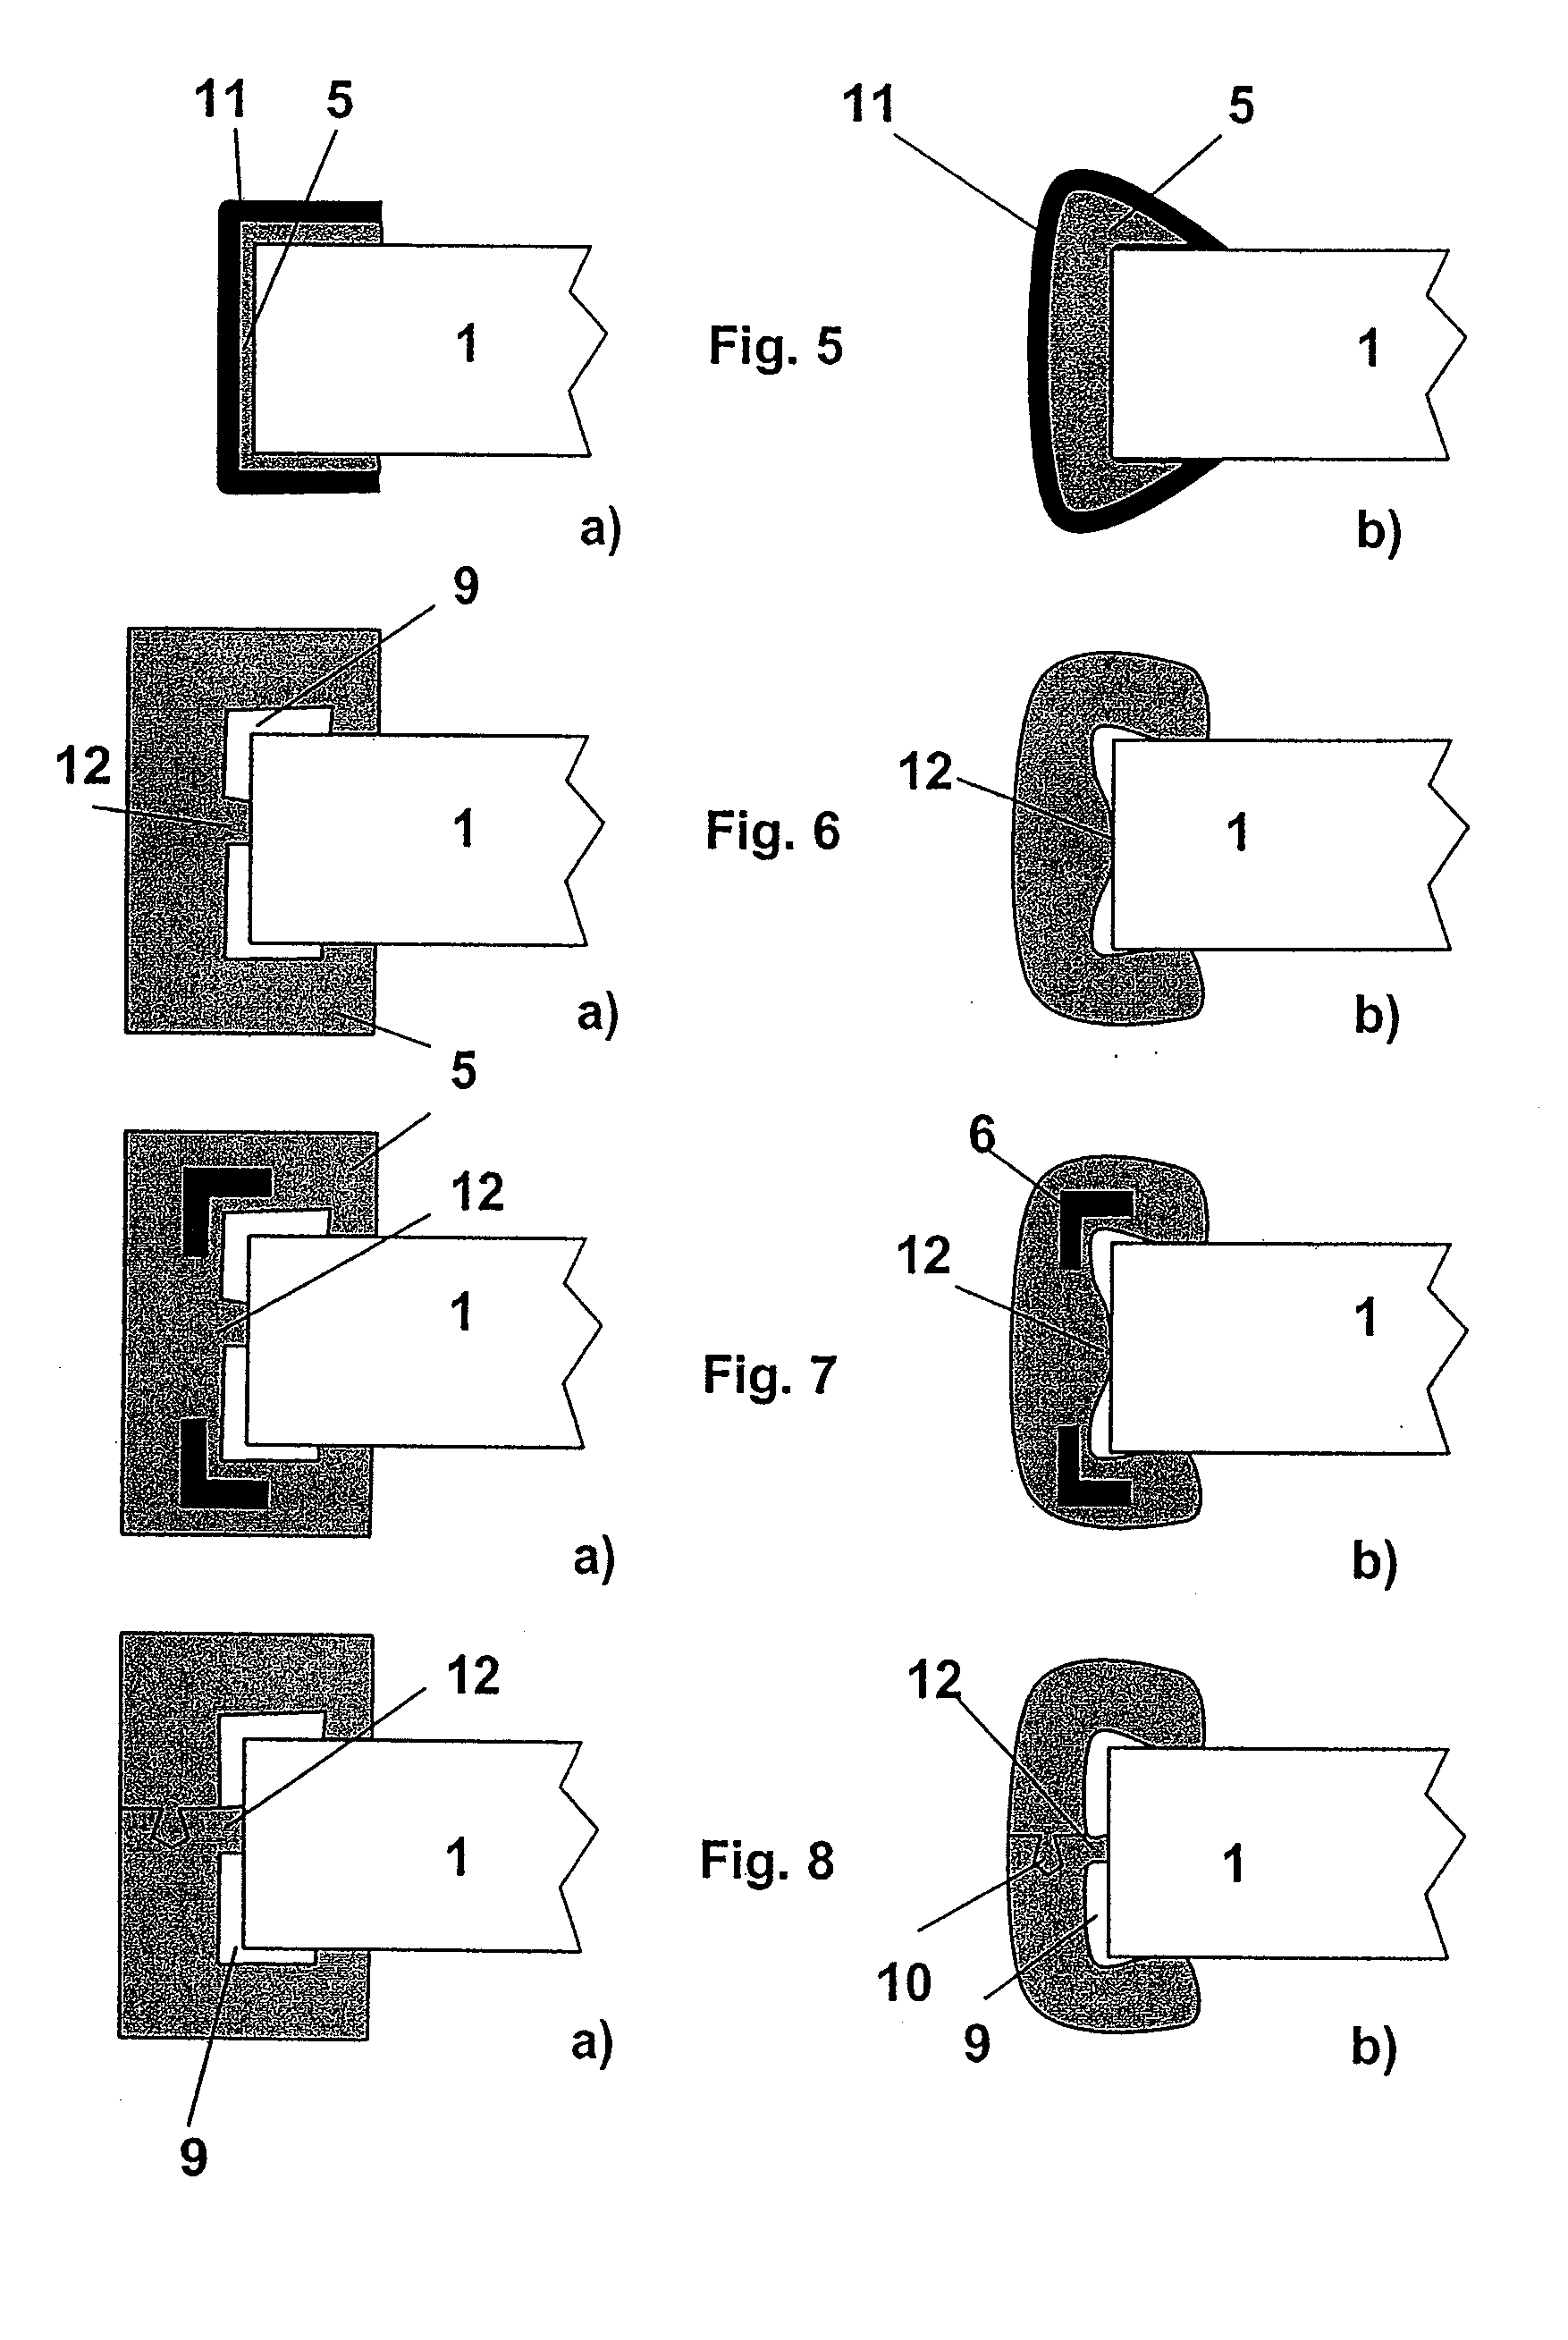 Method for Producing a Glass Pane